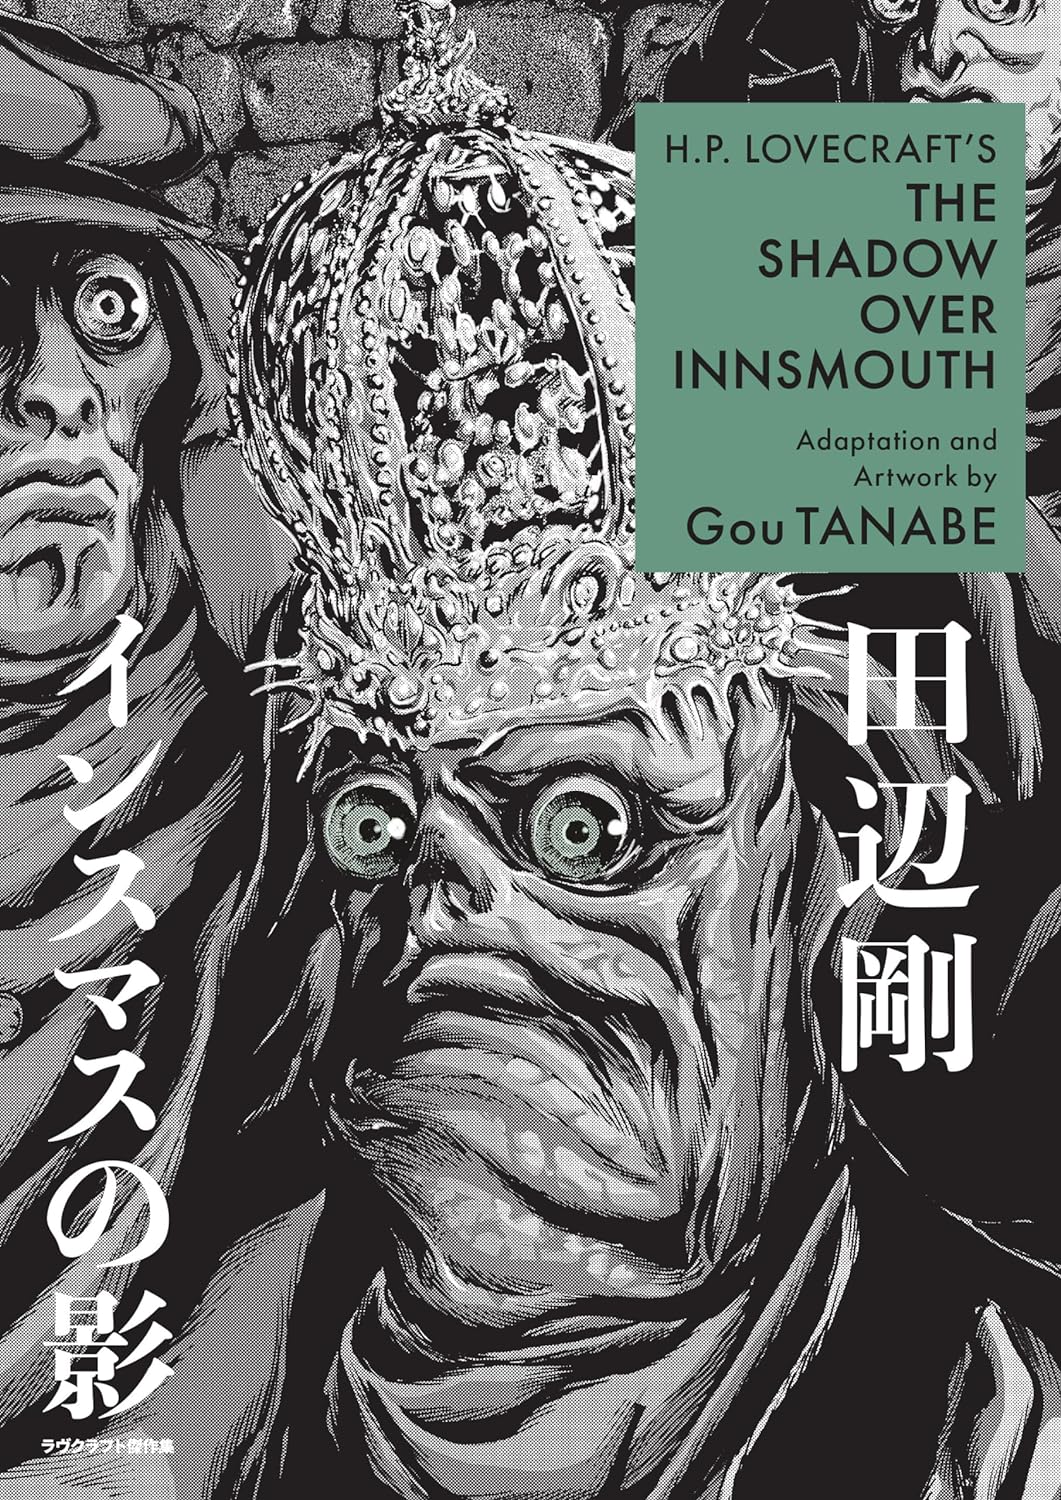 Publisher Dark Horse Comics - H.P. Lovecraft's The Shadow Over Innsmouth (Manga) - Gou Tanabe